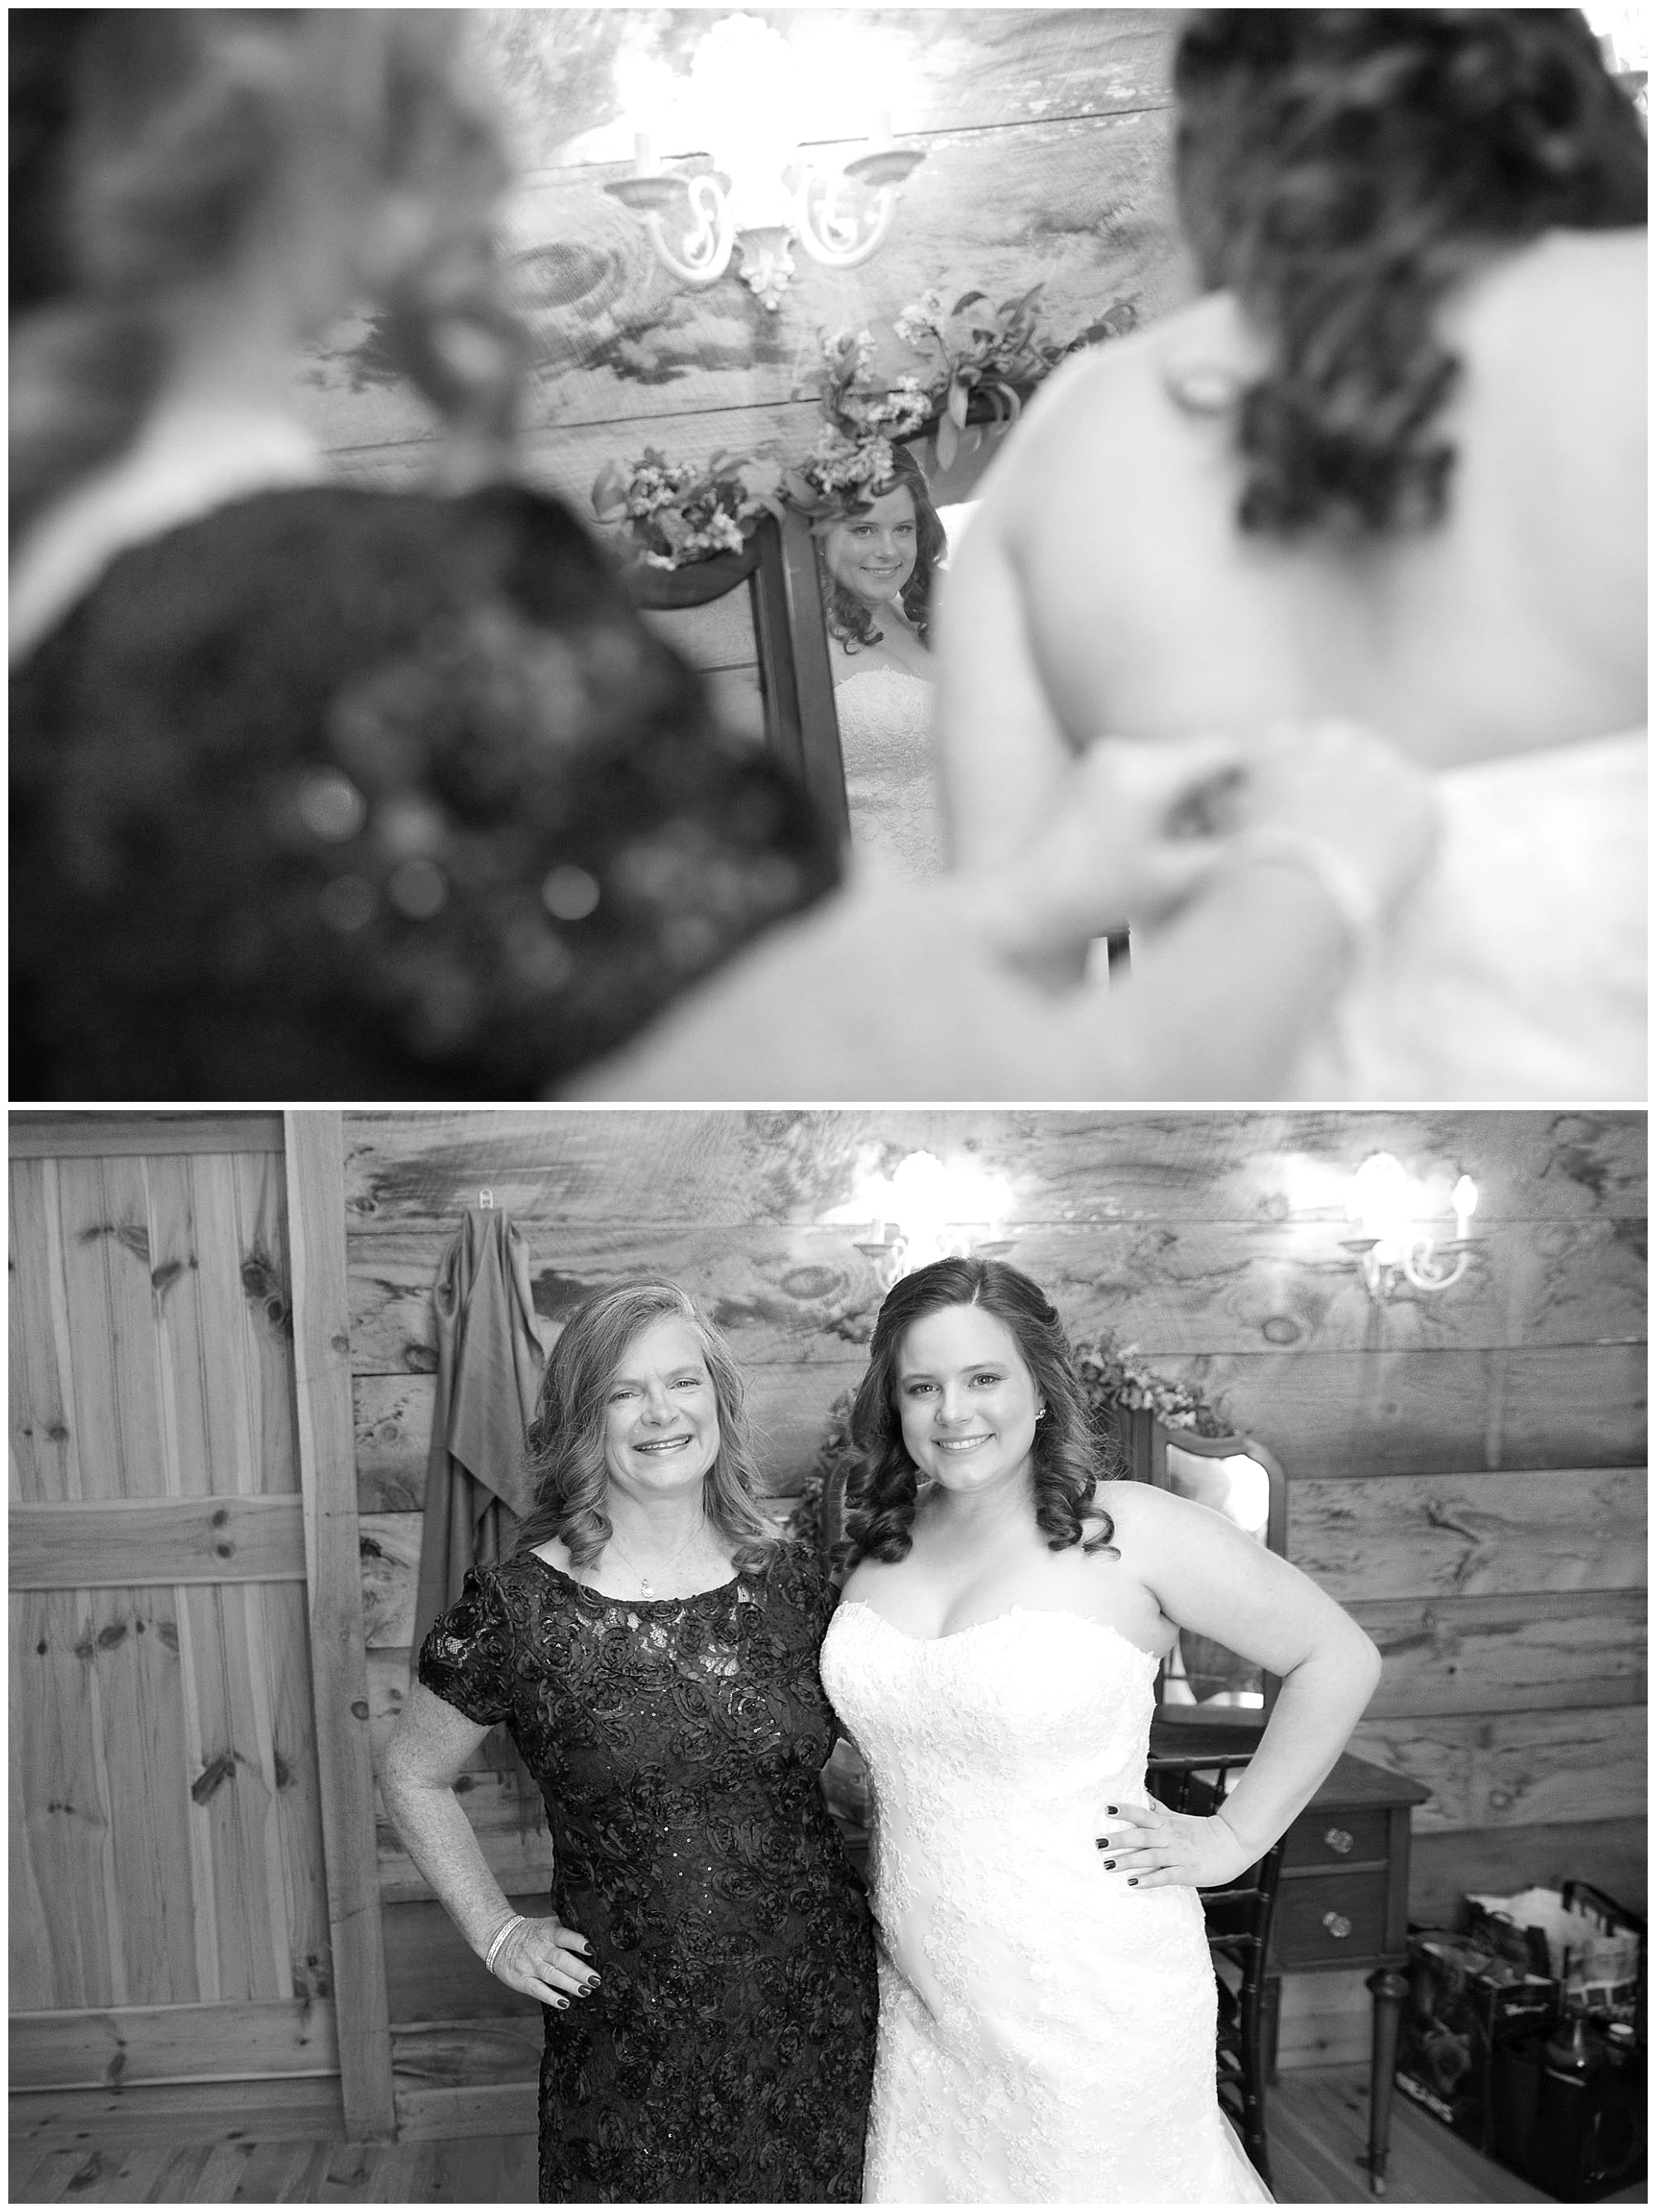 Two photos of a bride and her mother getting ready for the wedding and one of them side by side.